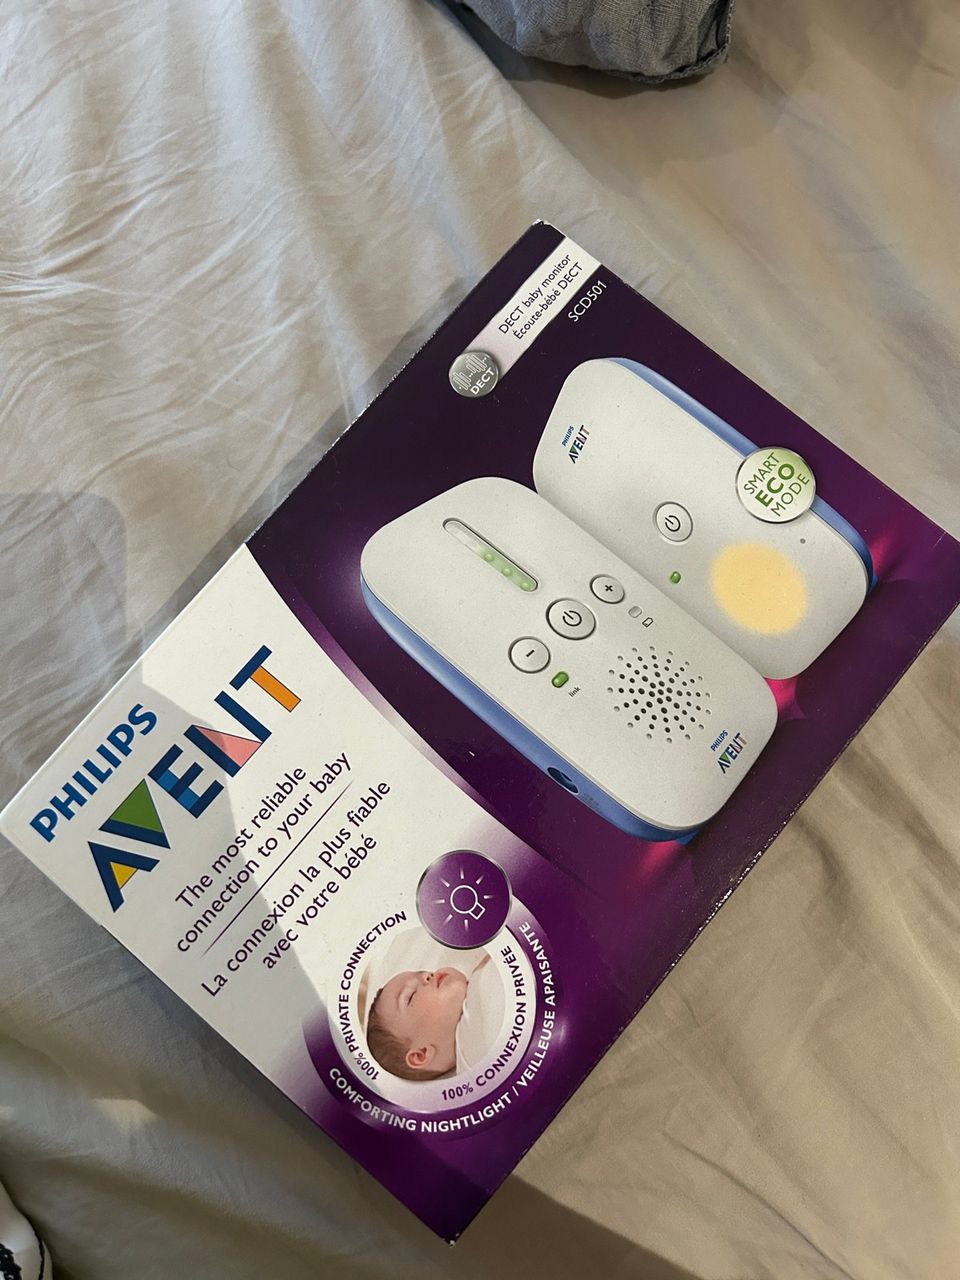 Avent Phillips- baby monitor